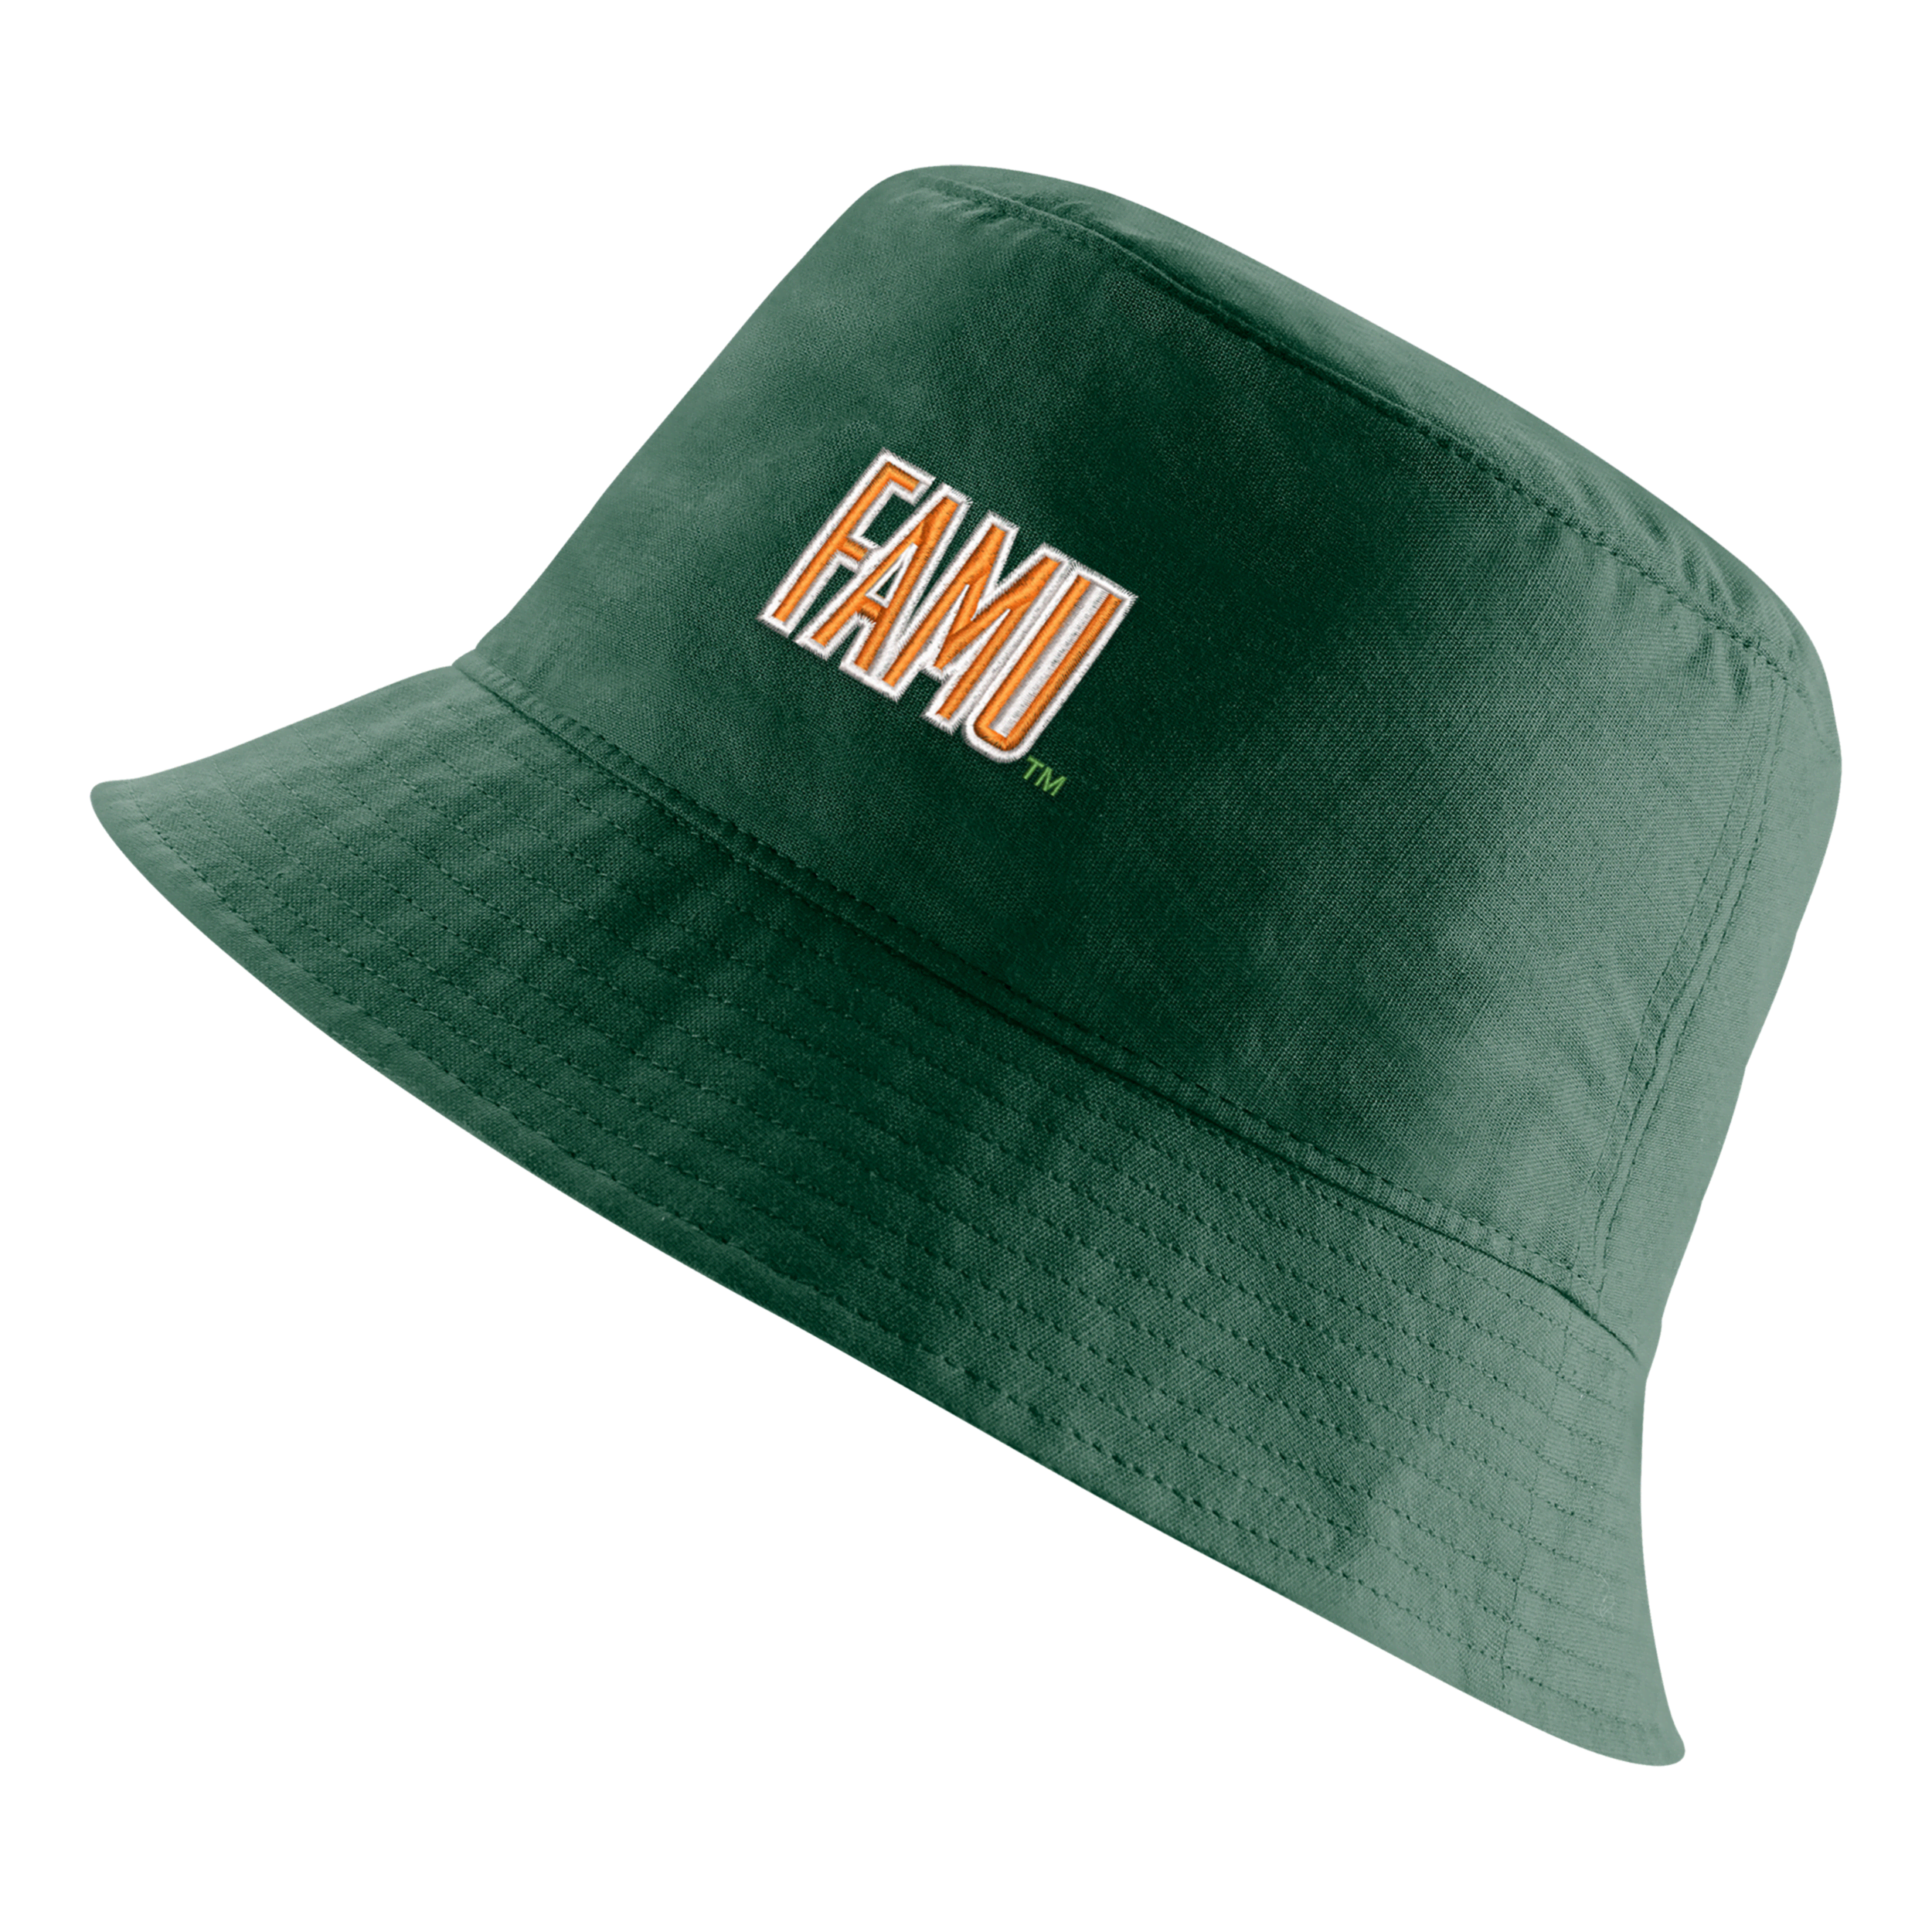 Nike Unisex College (florida A&m) Bucket Hat In Green